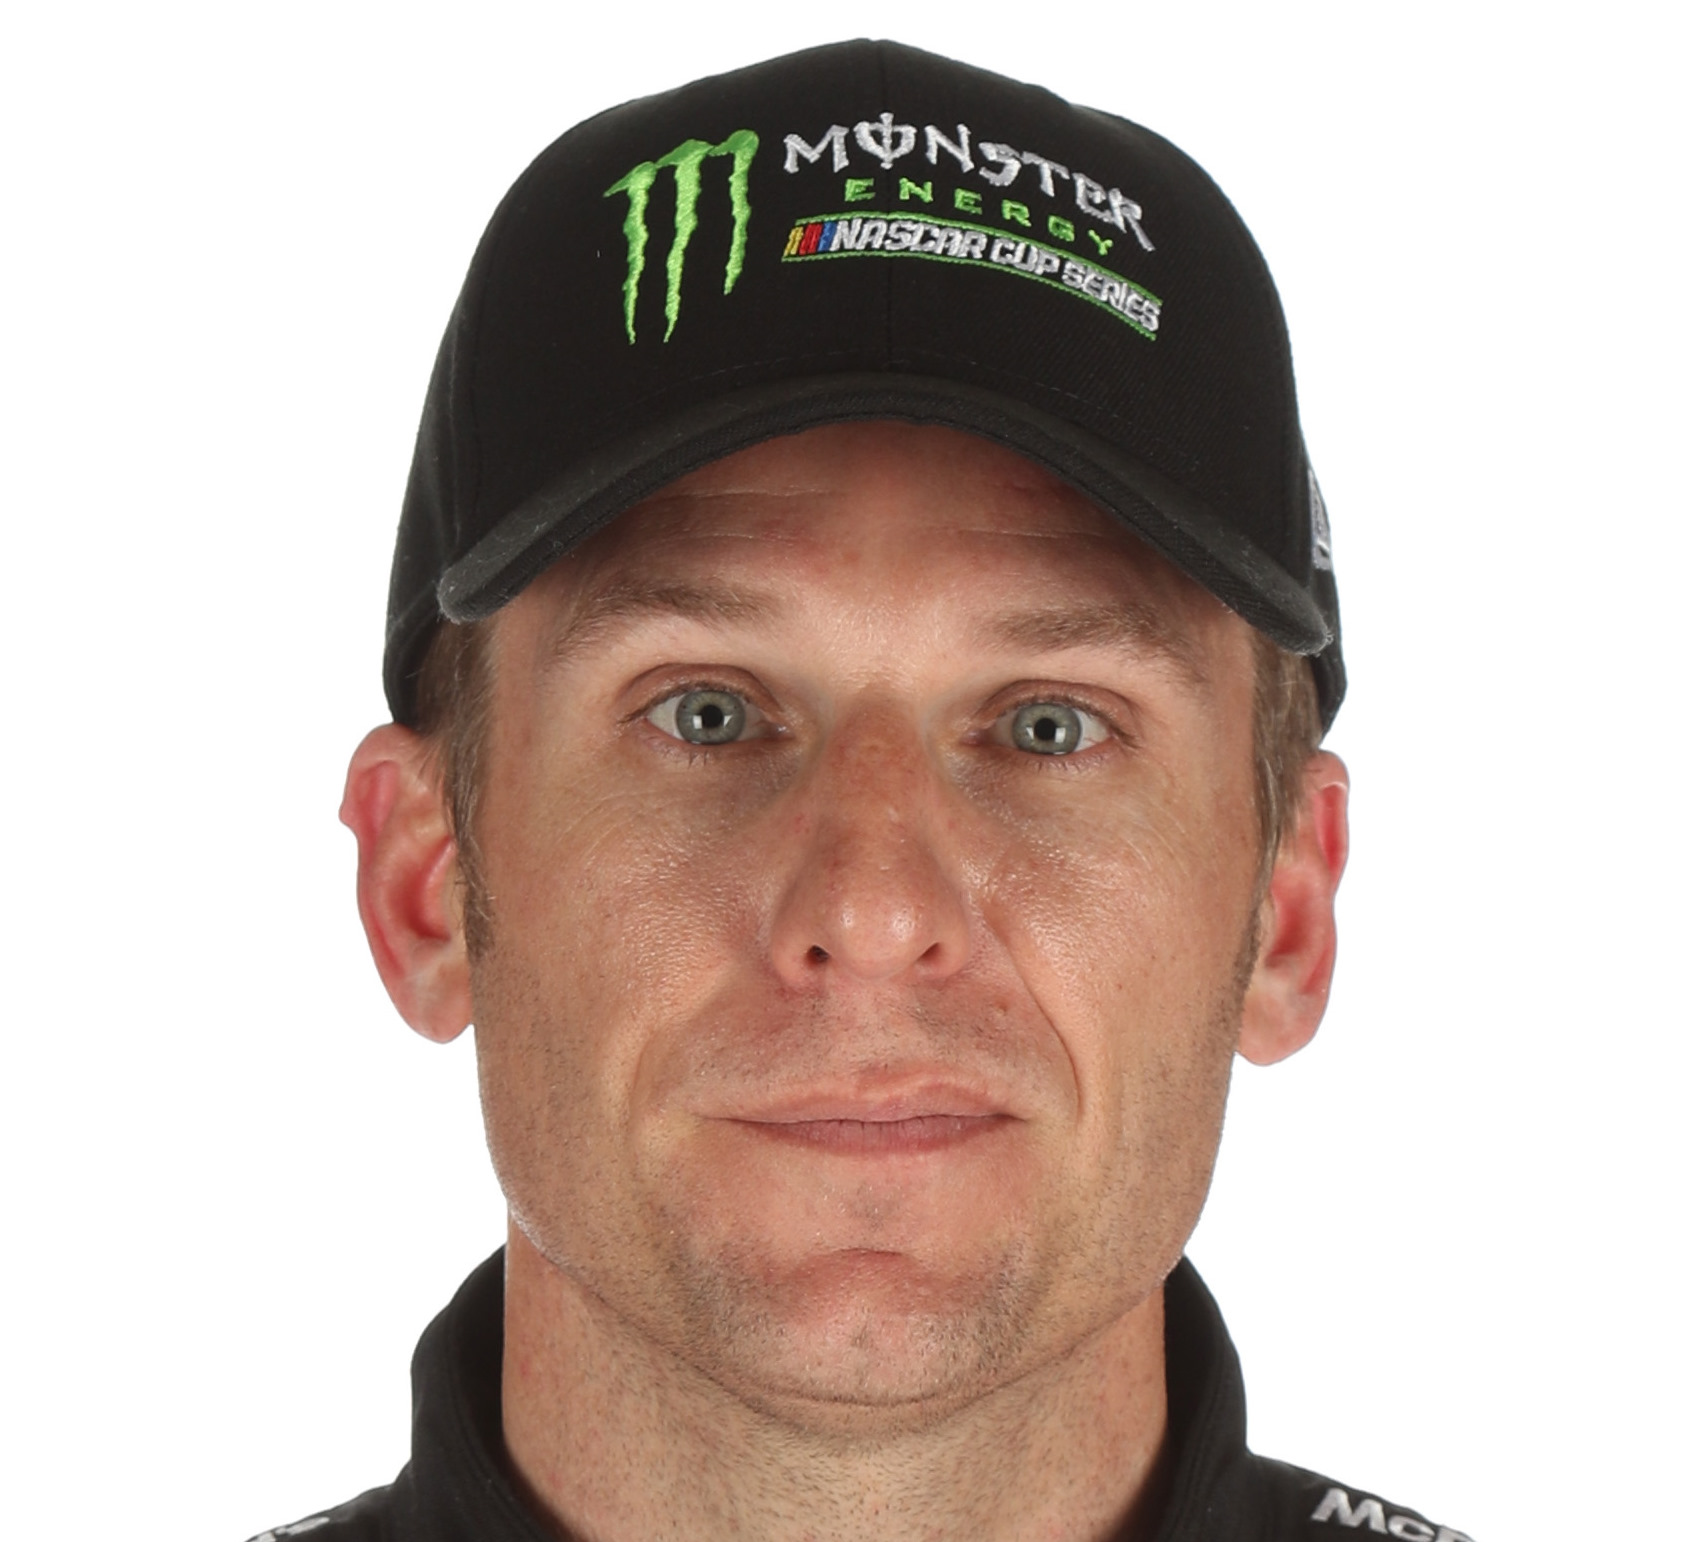 Jamie McMurray is enjoyng a solid season with 10 top-10 finishes. However, his spot in the NASCAR Playoffs is far from secure. 